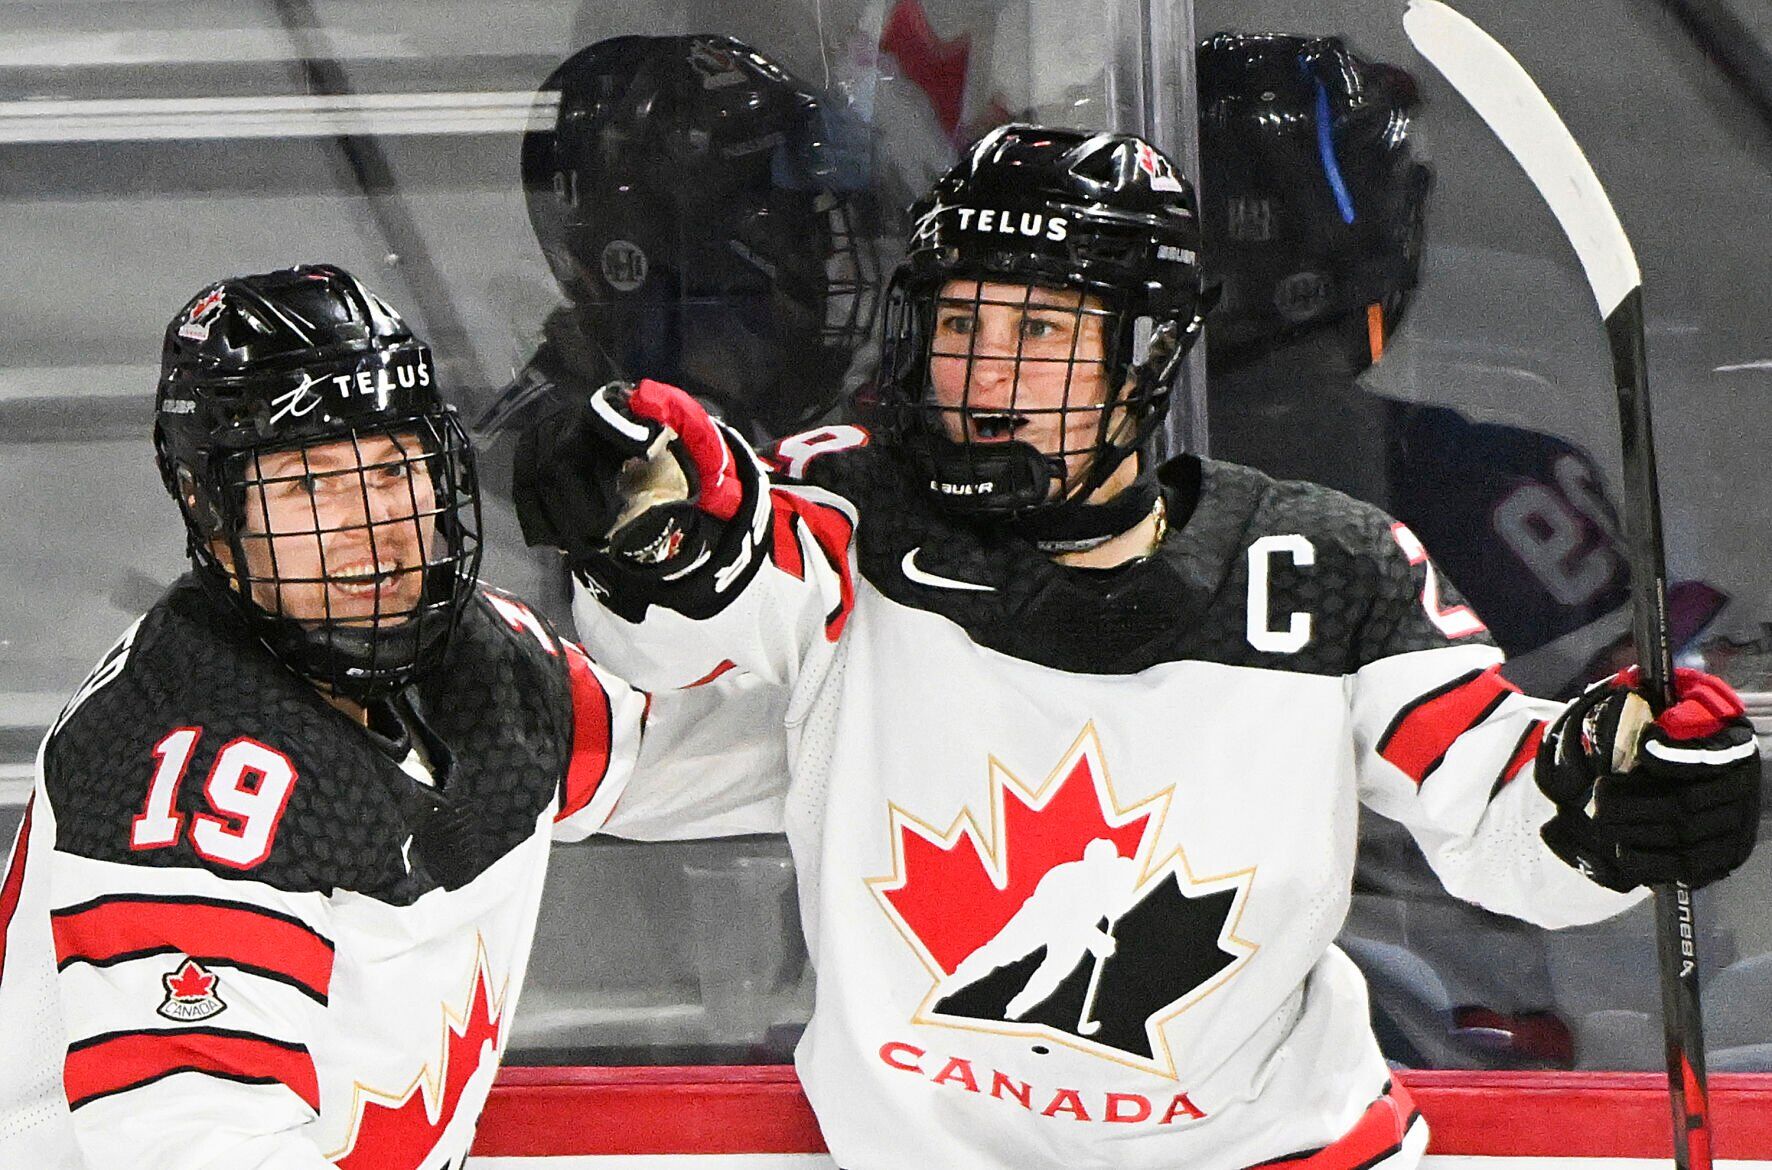 Catching Canada is the challenge at womens hockey worlds image